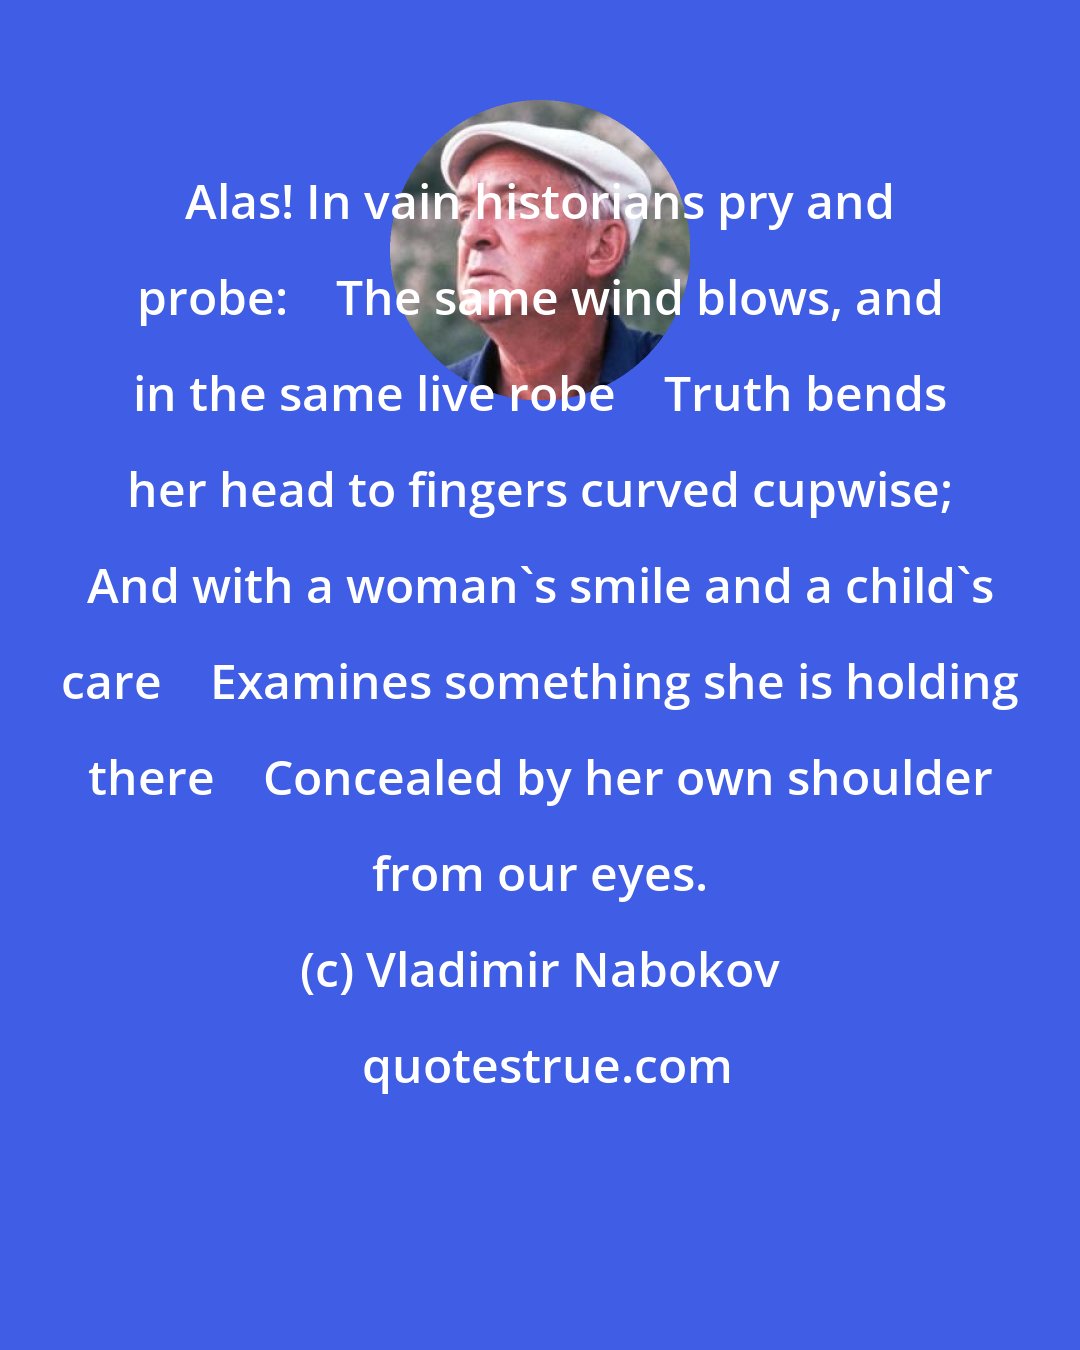 Vladimir Nabokov: Alas! In vain historians pry and probe:    The same wind blows, and in the same live robe    Truth bends her head to fingers curved cupwise; And with a woman's smile and a child's care    Examines something she is holding there    Concealed by her own shoulder from our eyes.